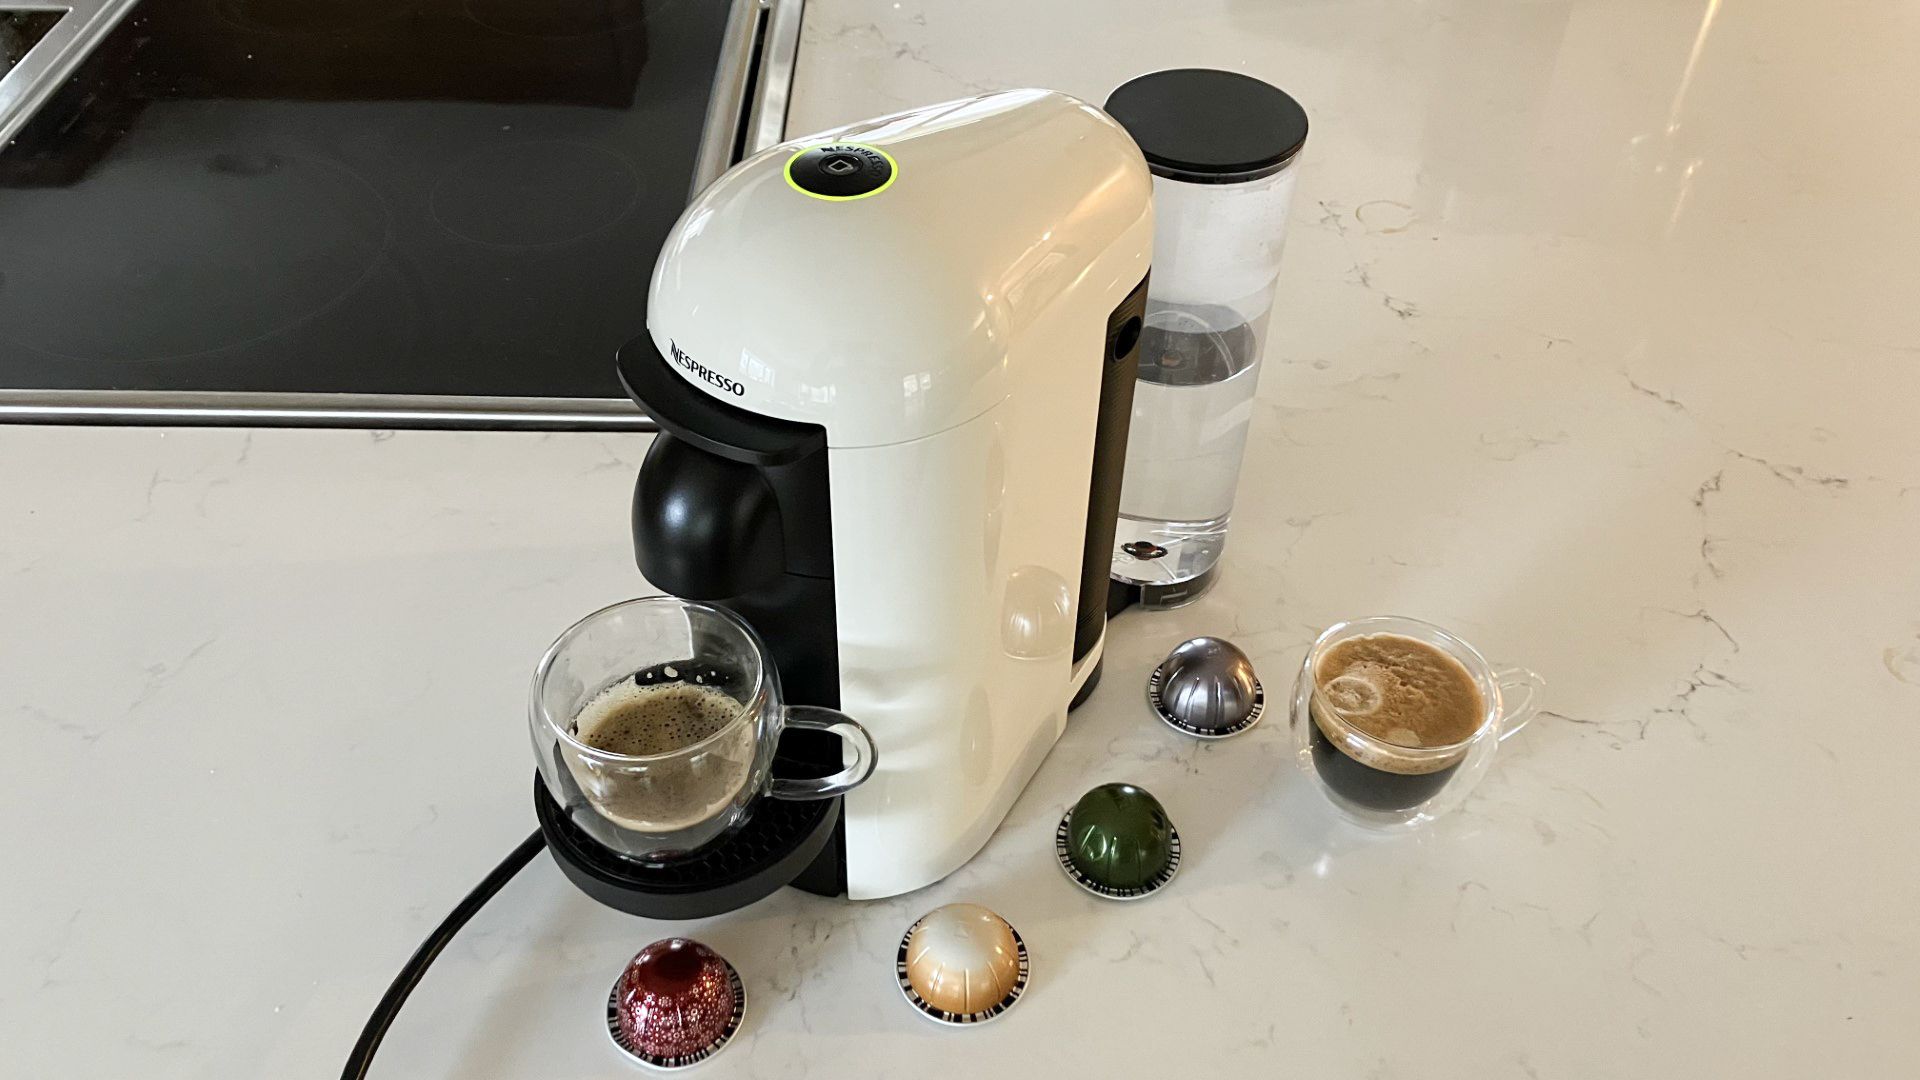 Act Fast:  Slashed the Prices of 20+ Nespresso Machines Up